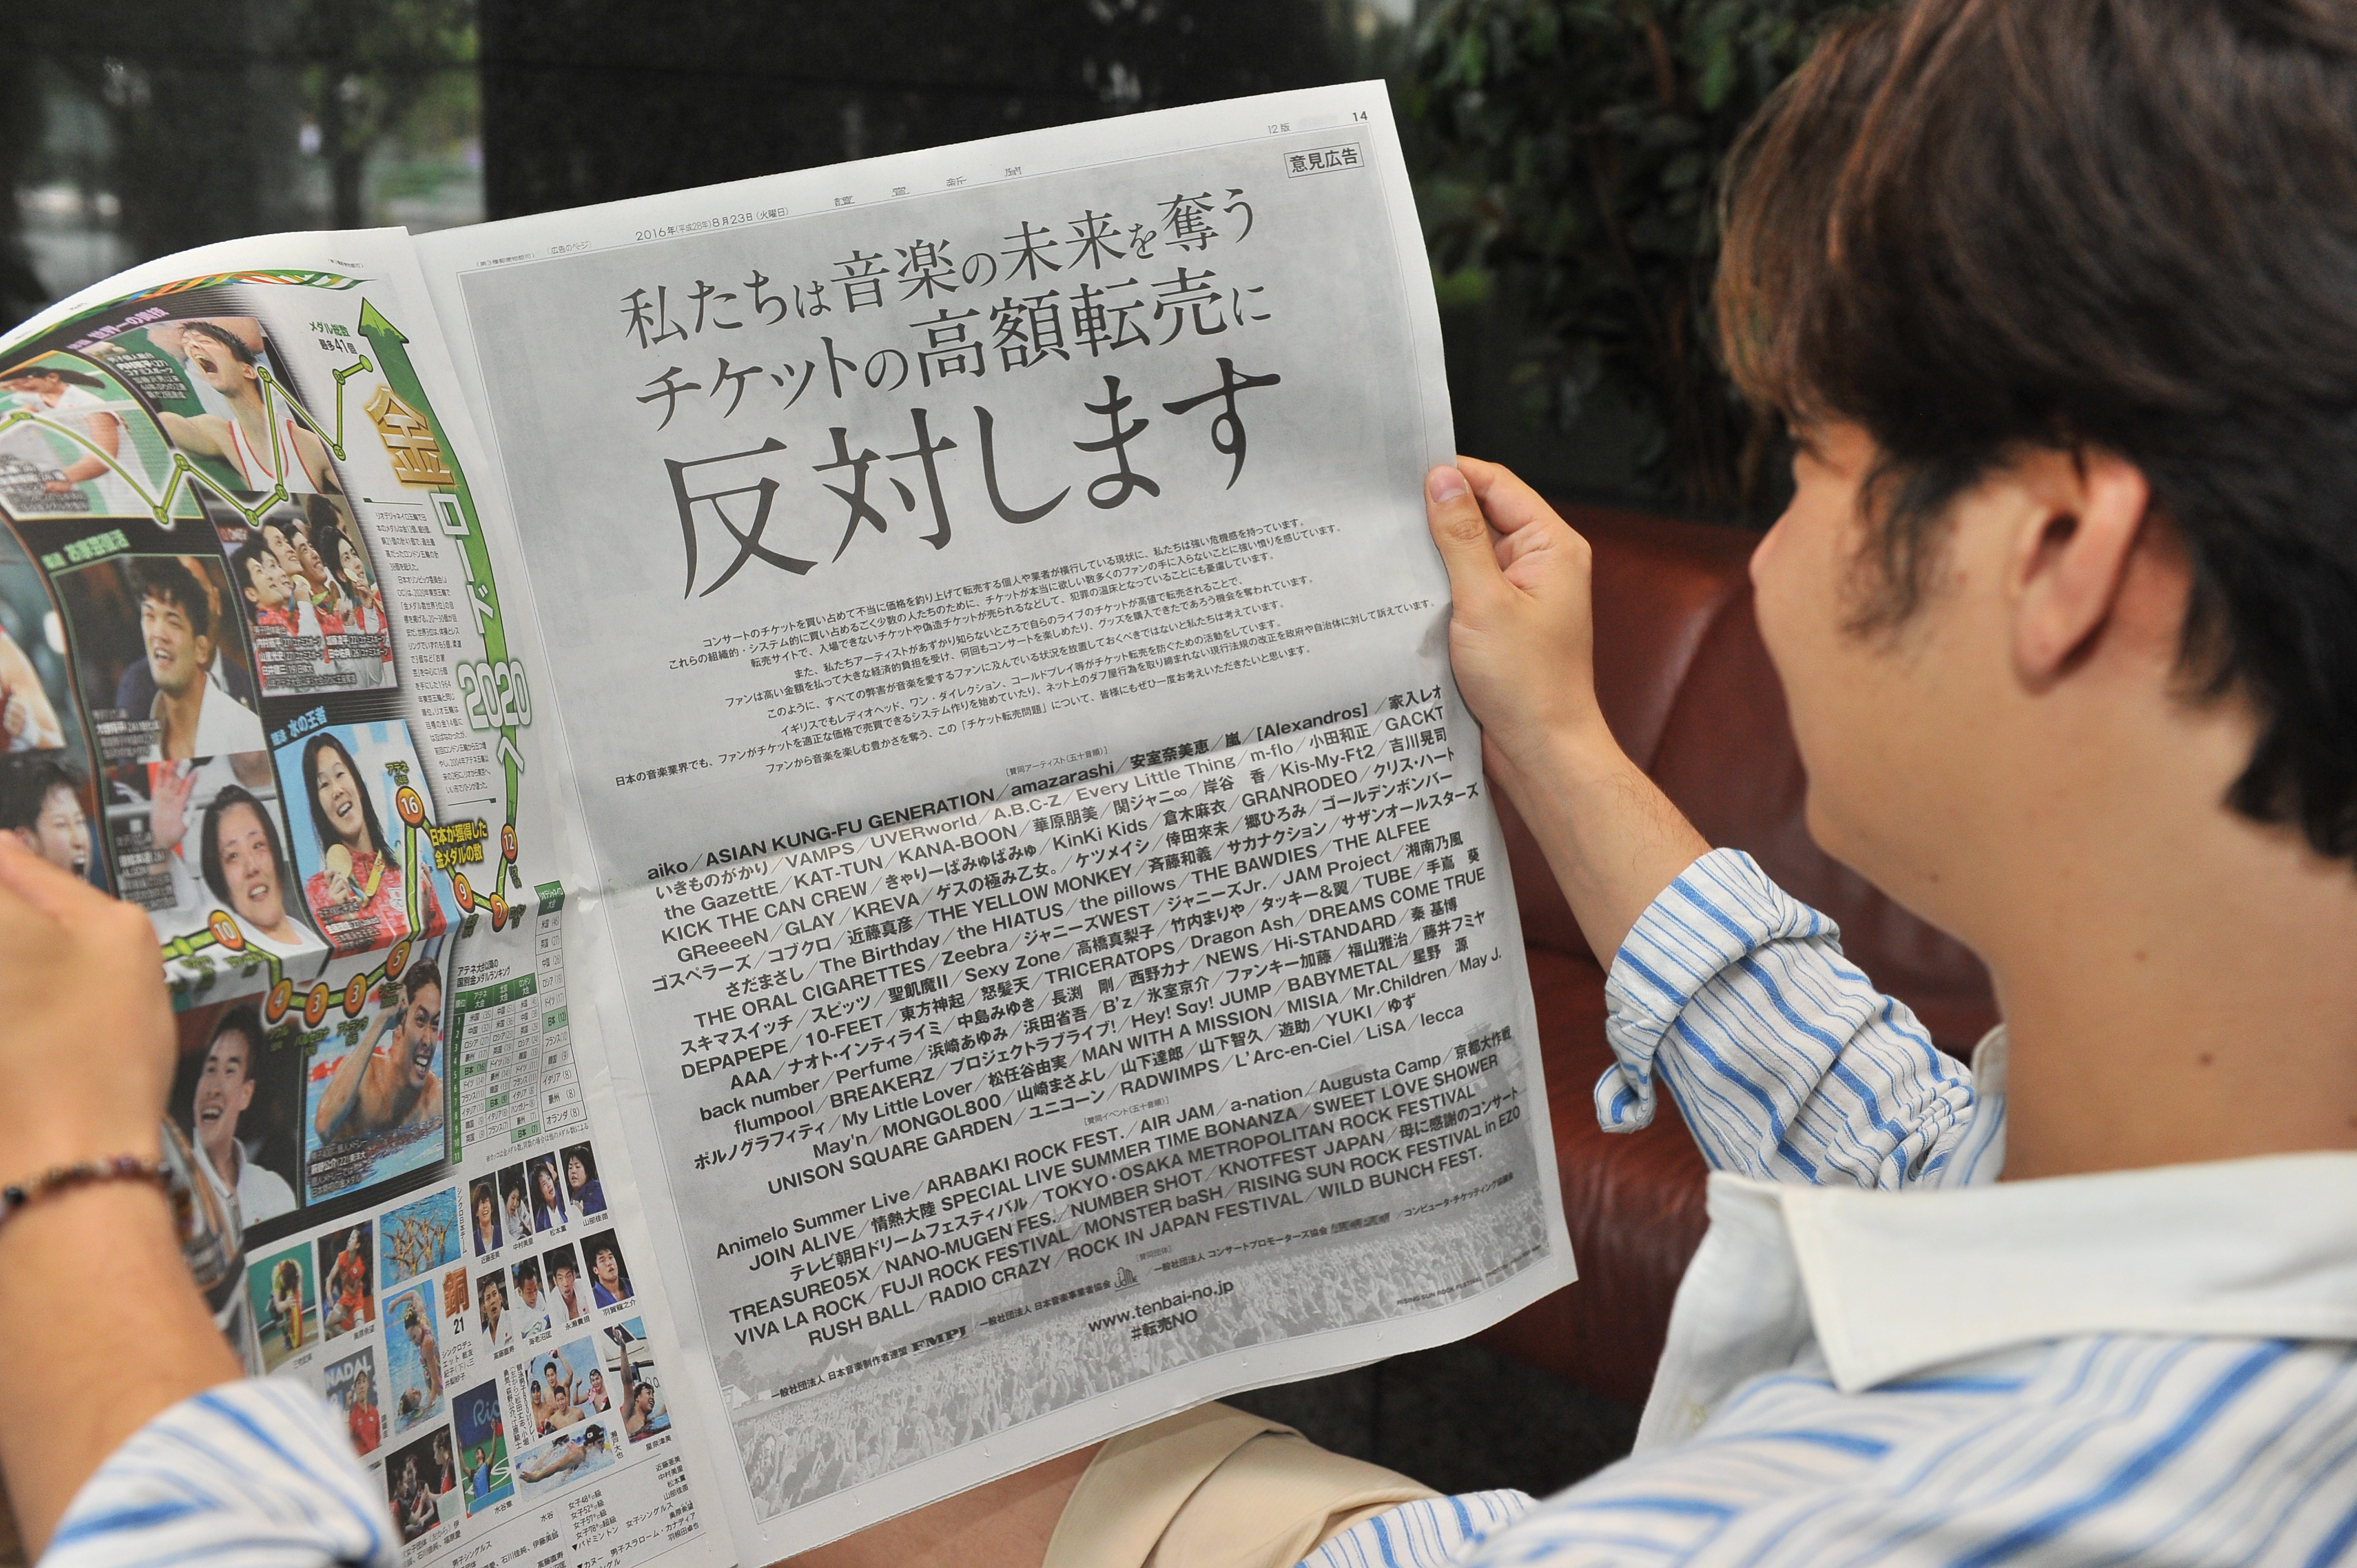 We're not gonna take it: A full-page advertisement in the Yomiuri Shimbun on Aug. 23 voices opposition to the high-priced reselling of concert tickets. | YOSHIAKI MIURA